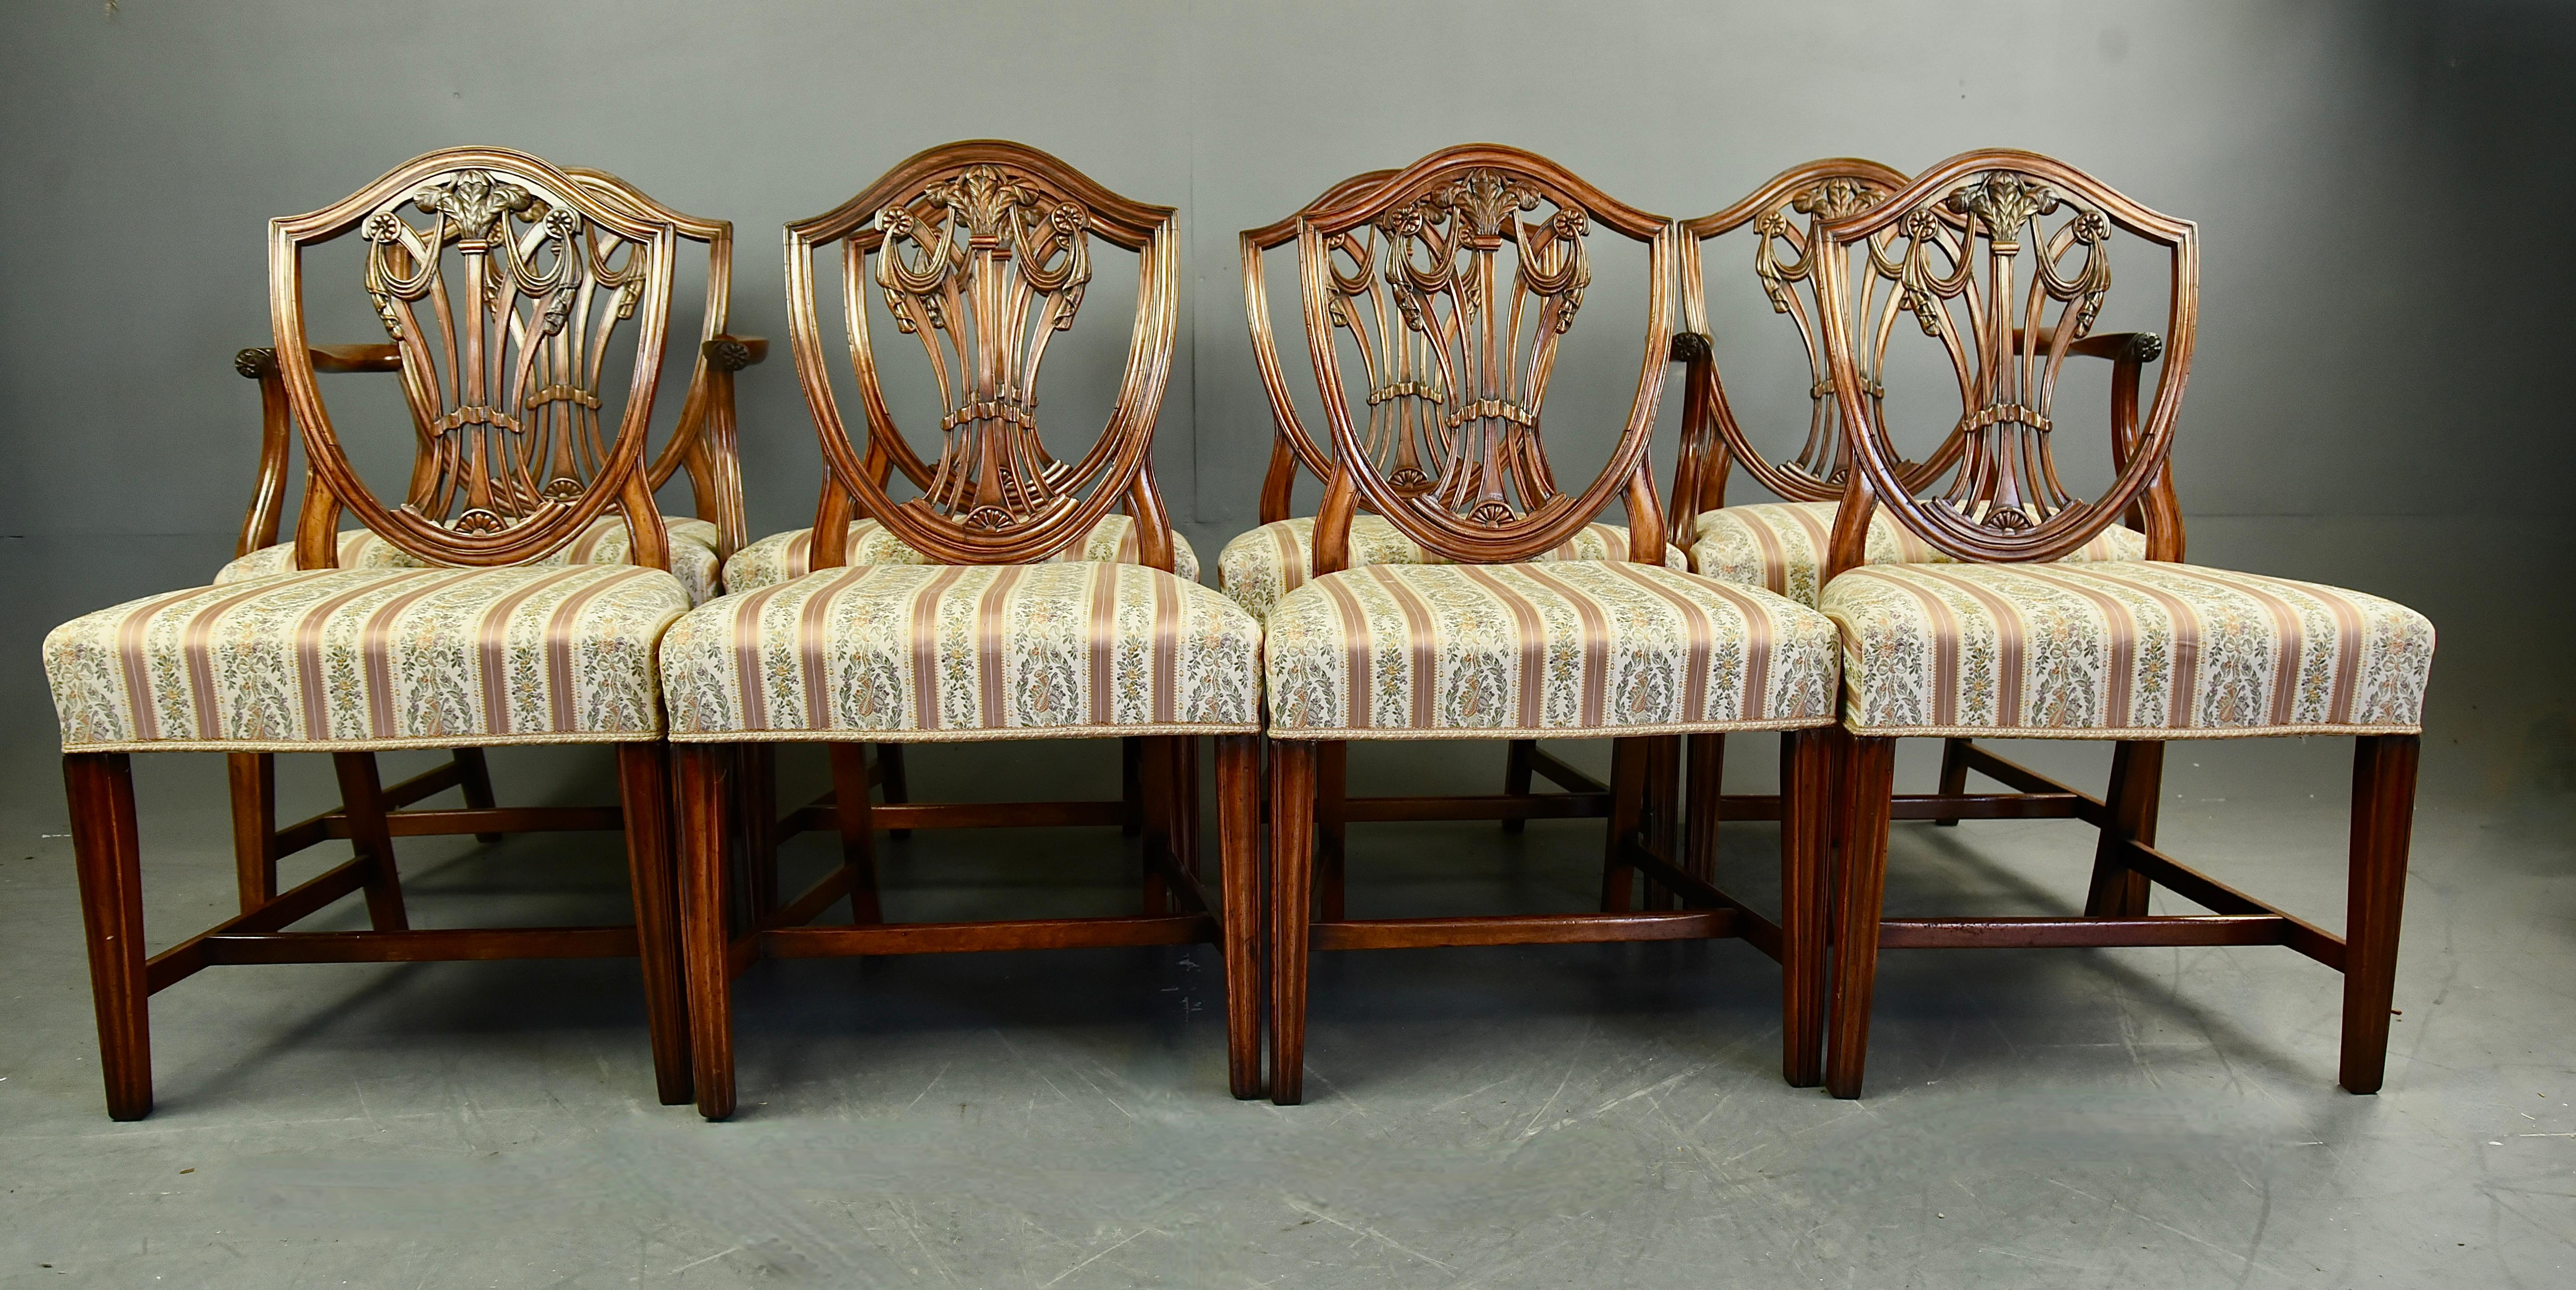 Fine set of eight Georgian Hepplewhite shield back dining chairs .stamped Gillow.
These stunning chairs have been made by the finest English furnitures makers .
The fine hand caved backs feature the prince of Wales feathers that have been carved to